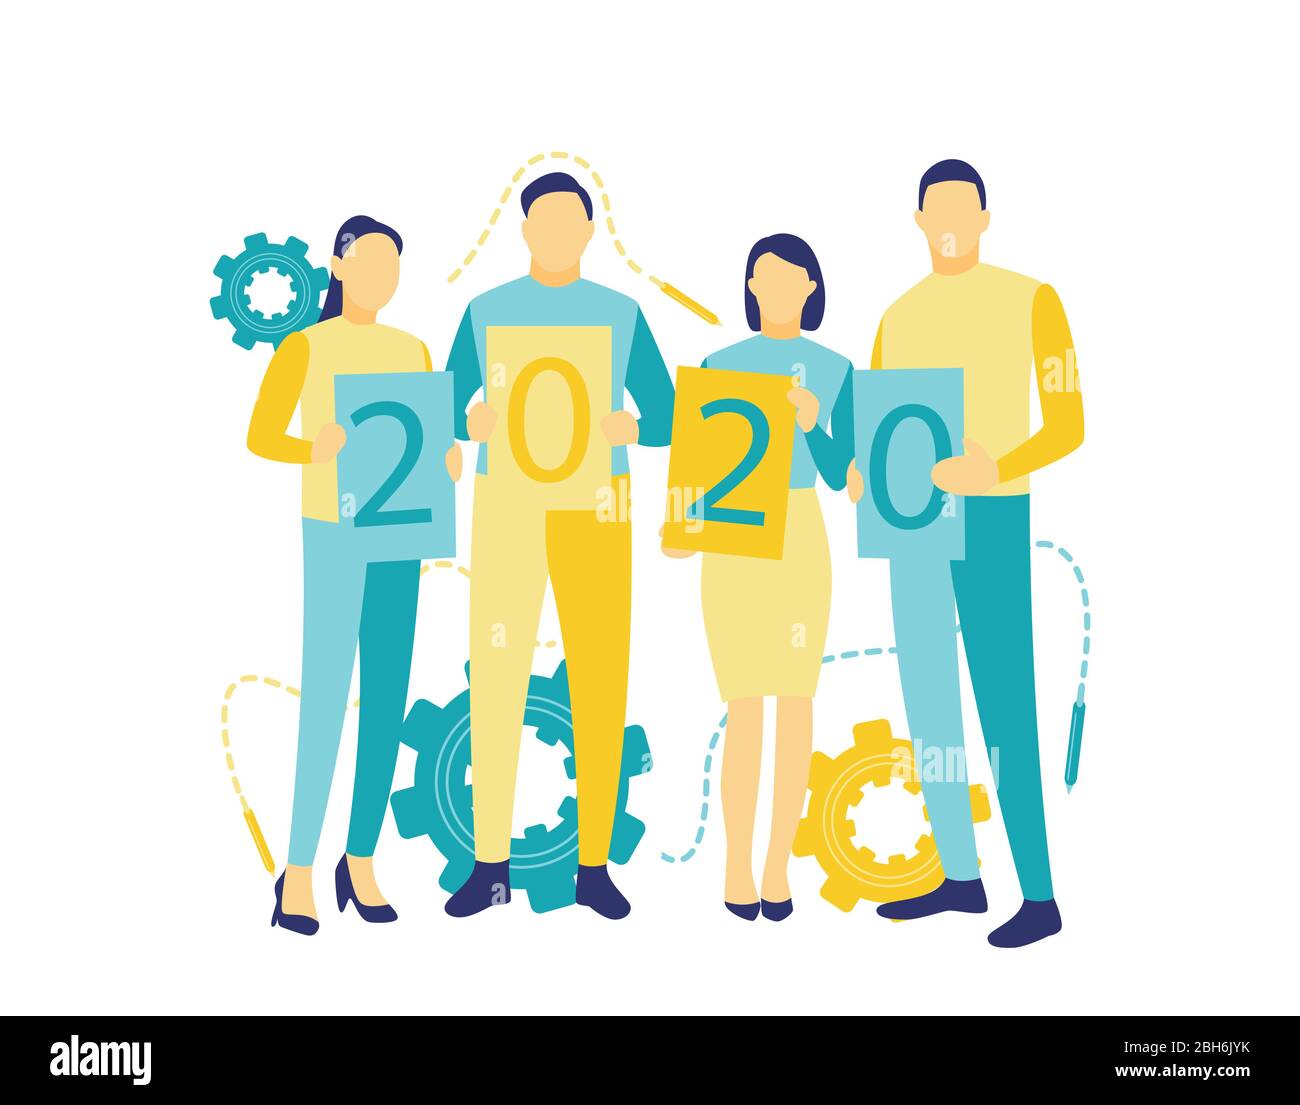 Illustration of people holding placards that read 2020 in flat blue and yellow style. The concept of team work in 2020. Stock Vector